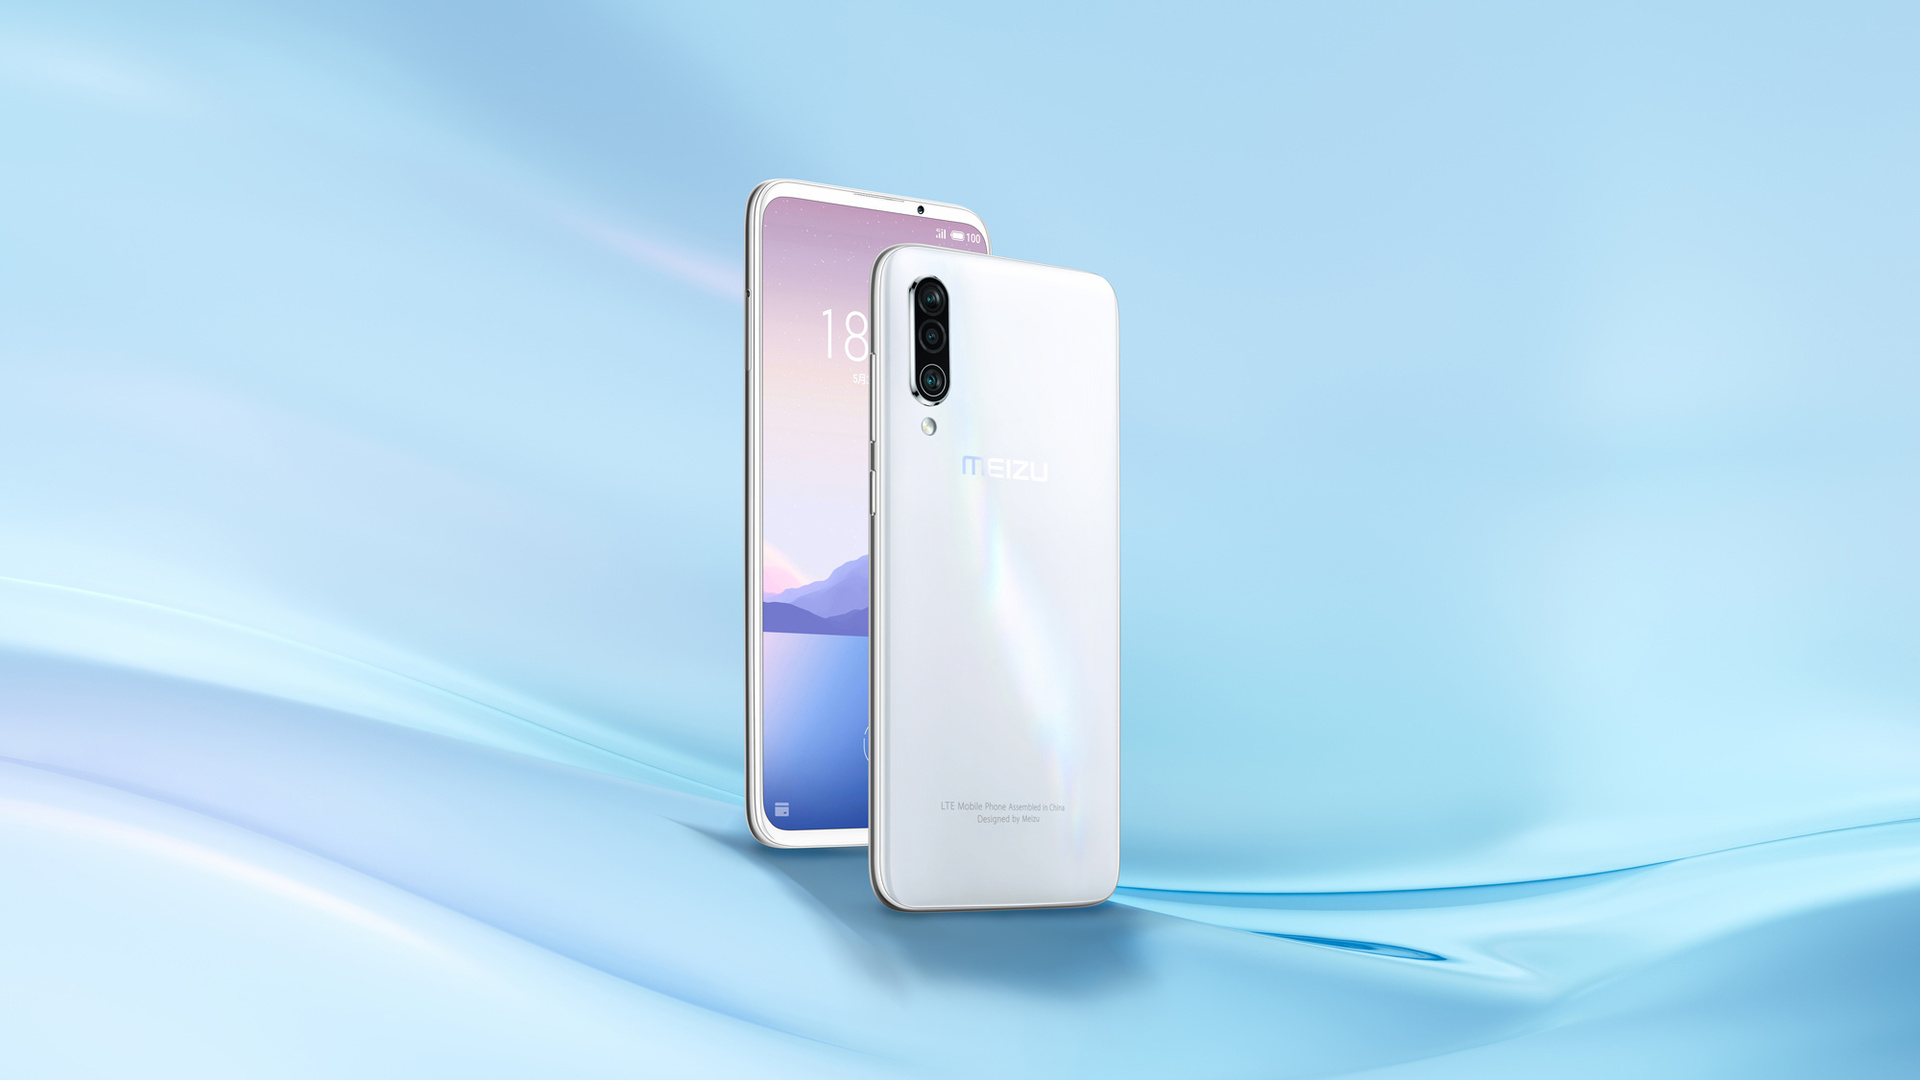 Official render of the Meizu 16XS.